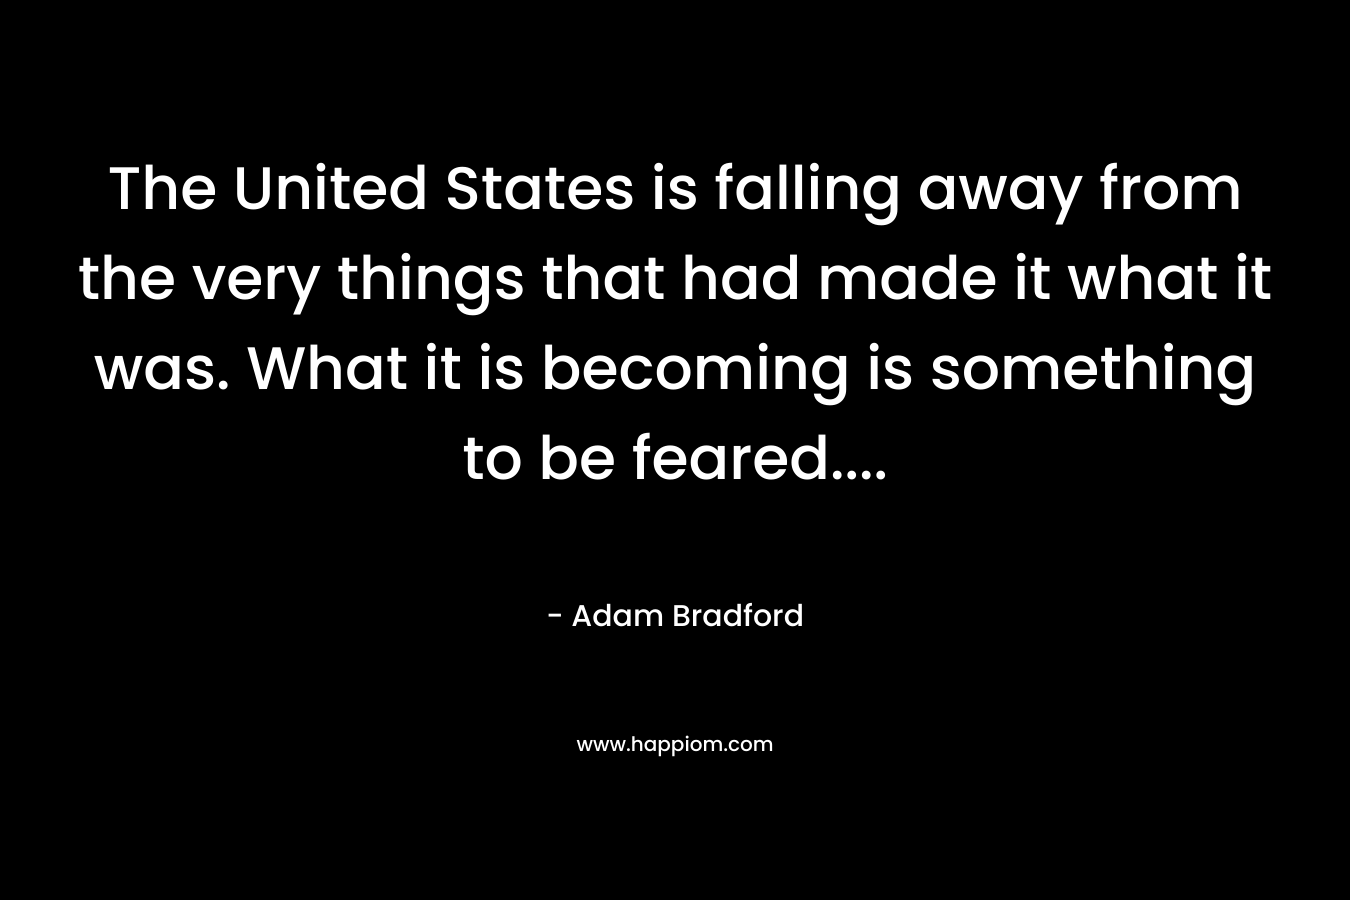 The United States is falling away from the very things that had made it what it was. What it is becoming is something to be feared…. – Adam Bradford